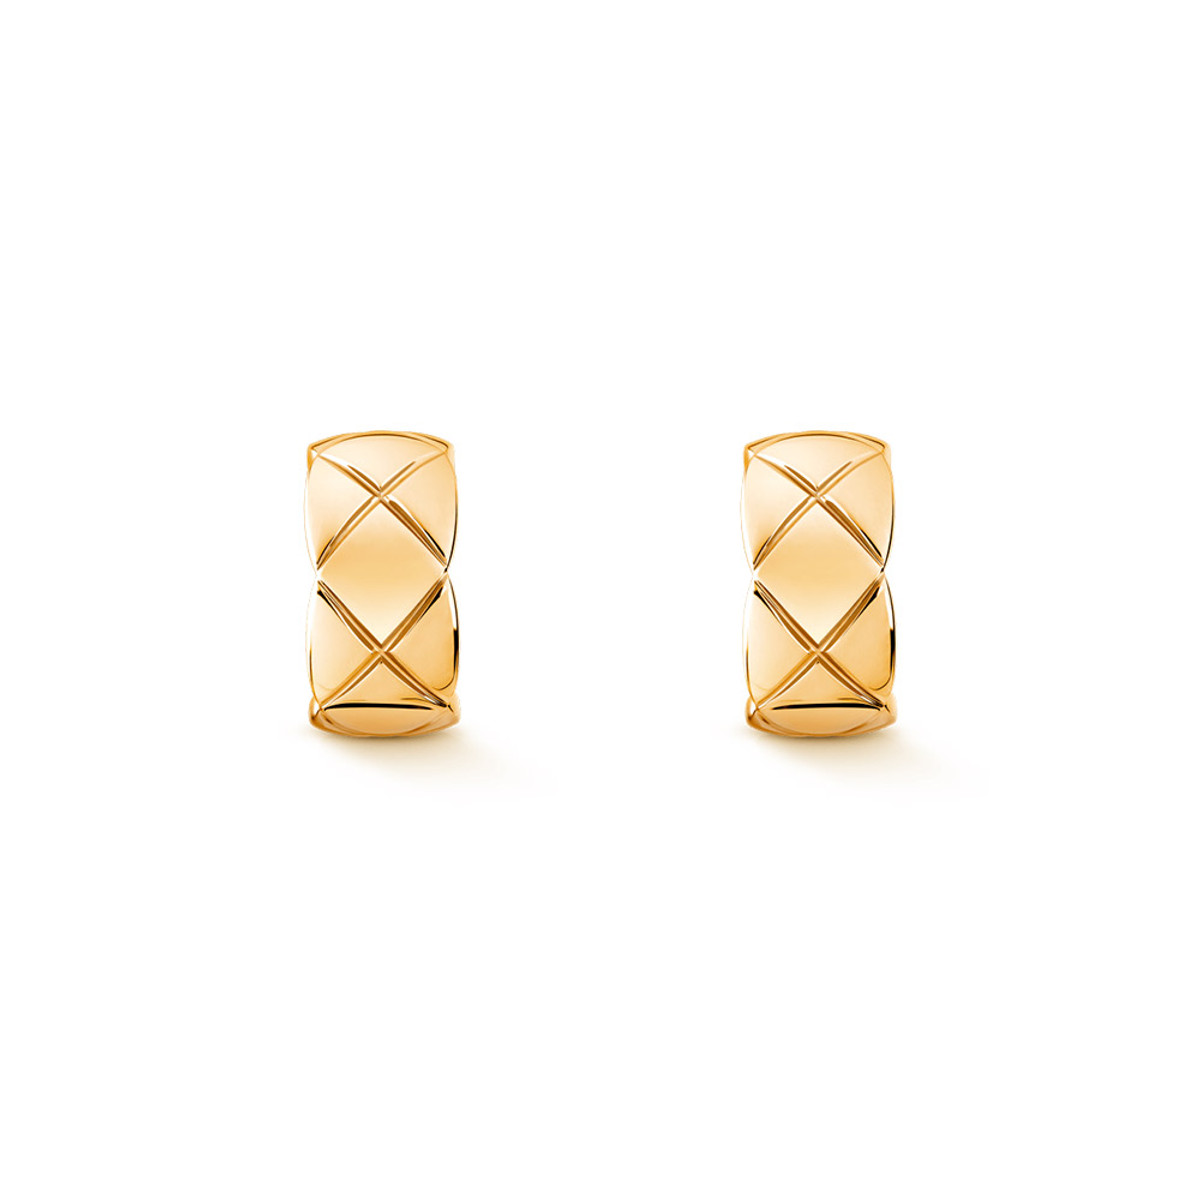 Chanel 18K Yellow Gold Coco Crush Earrings-25915 Product Image